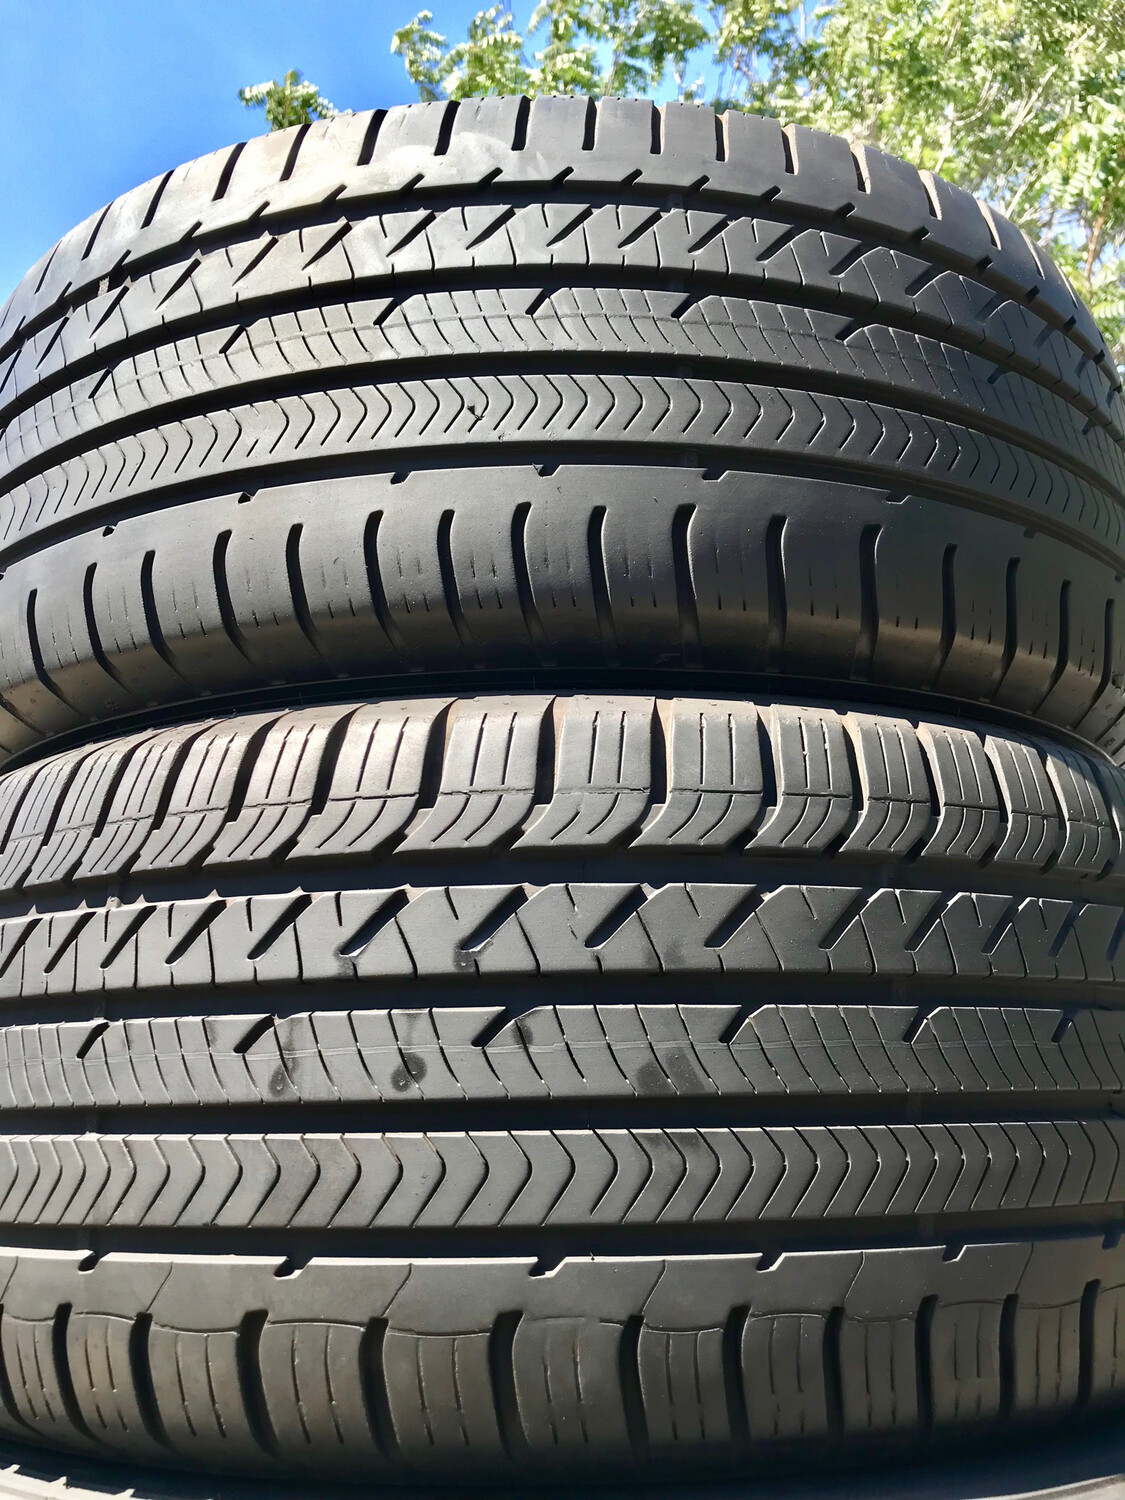 2 USED TIRES 285/45R20 Goodyear EAGLE SPORT A/S RFT WITH 90% TREAD LIFE